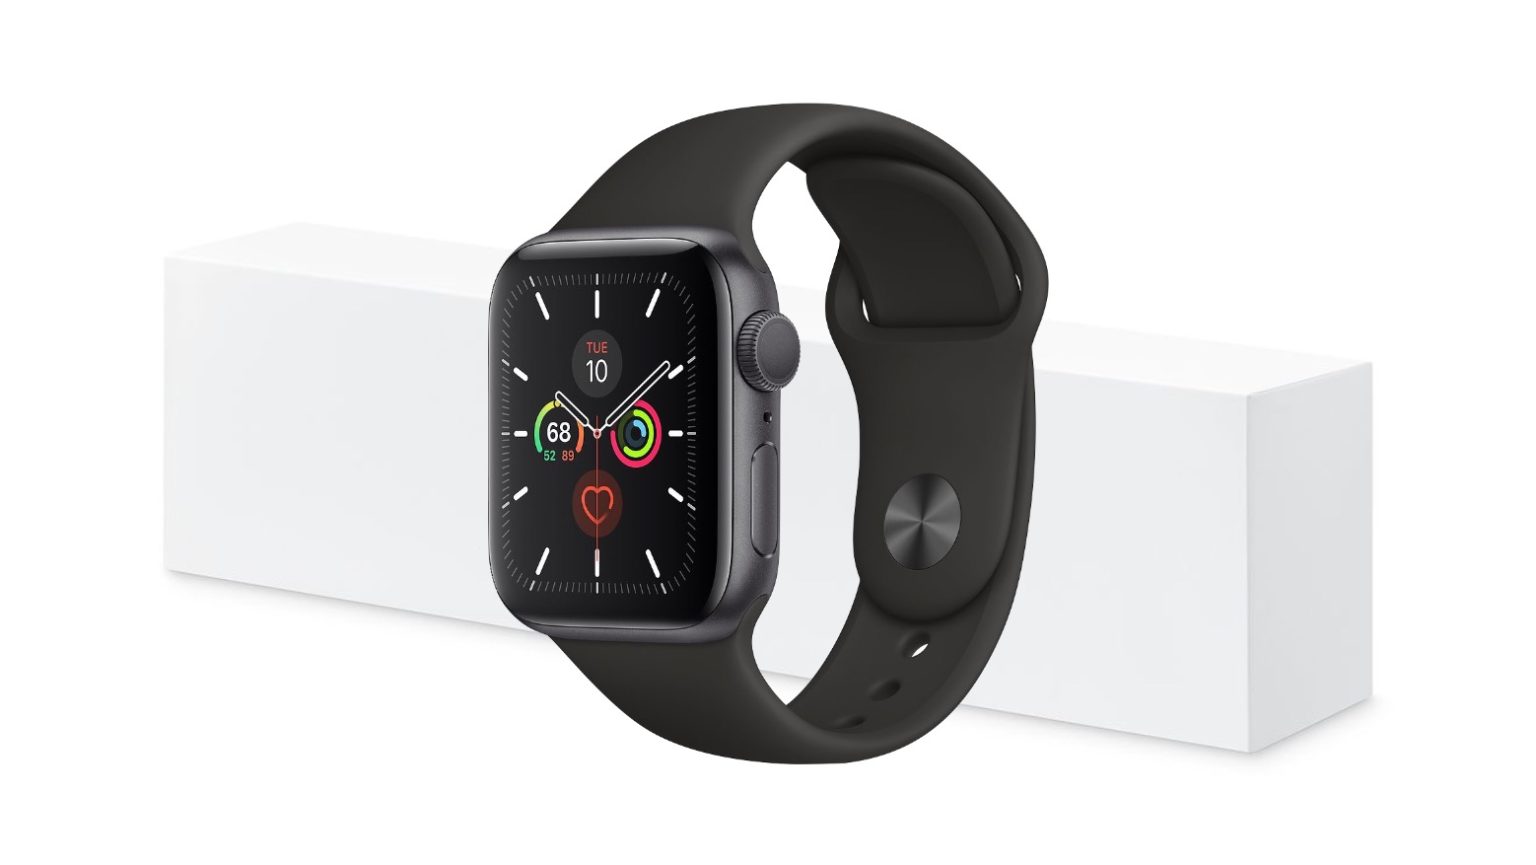 Refurbished Apple Watch Series 5 units are available now